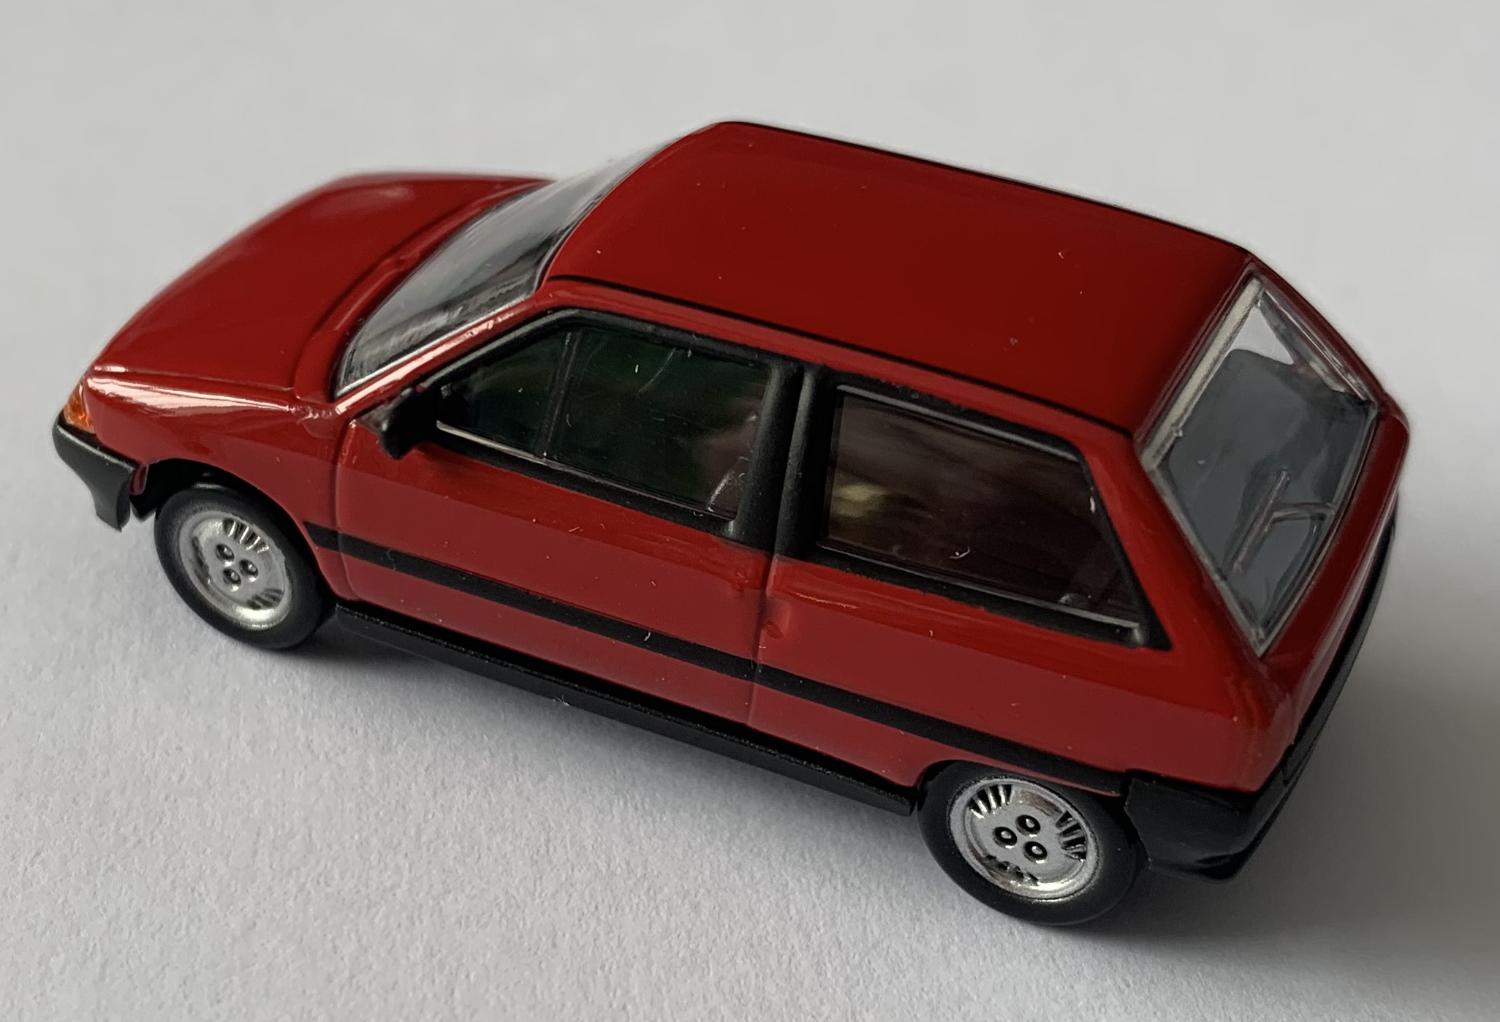 Citroen AX 1986 in red 1:64 scale model car from Norev, 310920, approx 5.5cm long